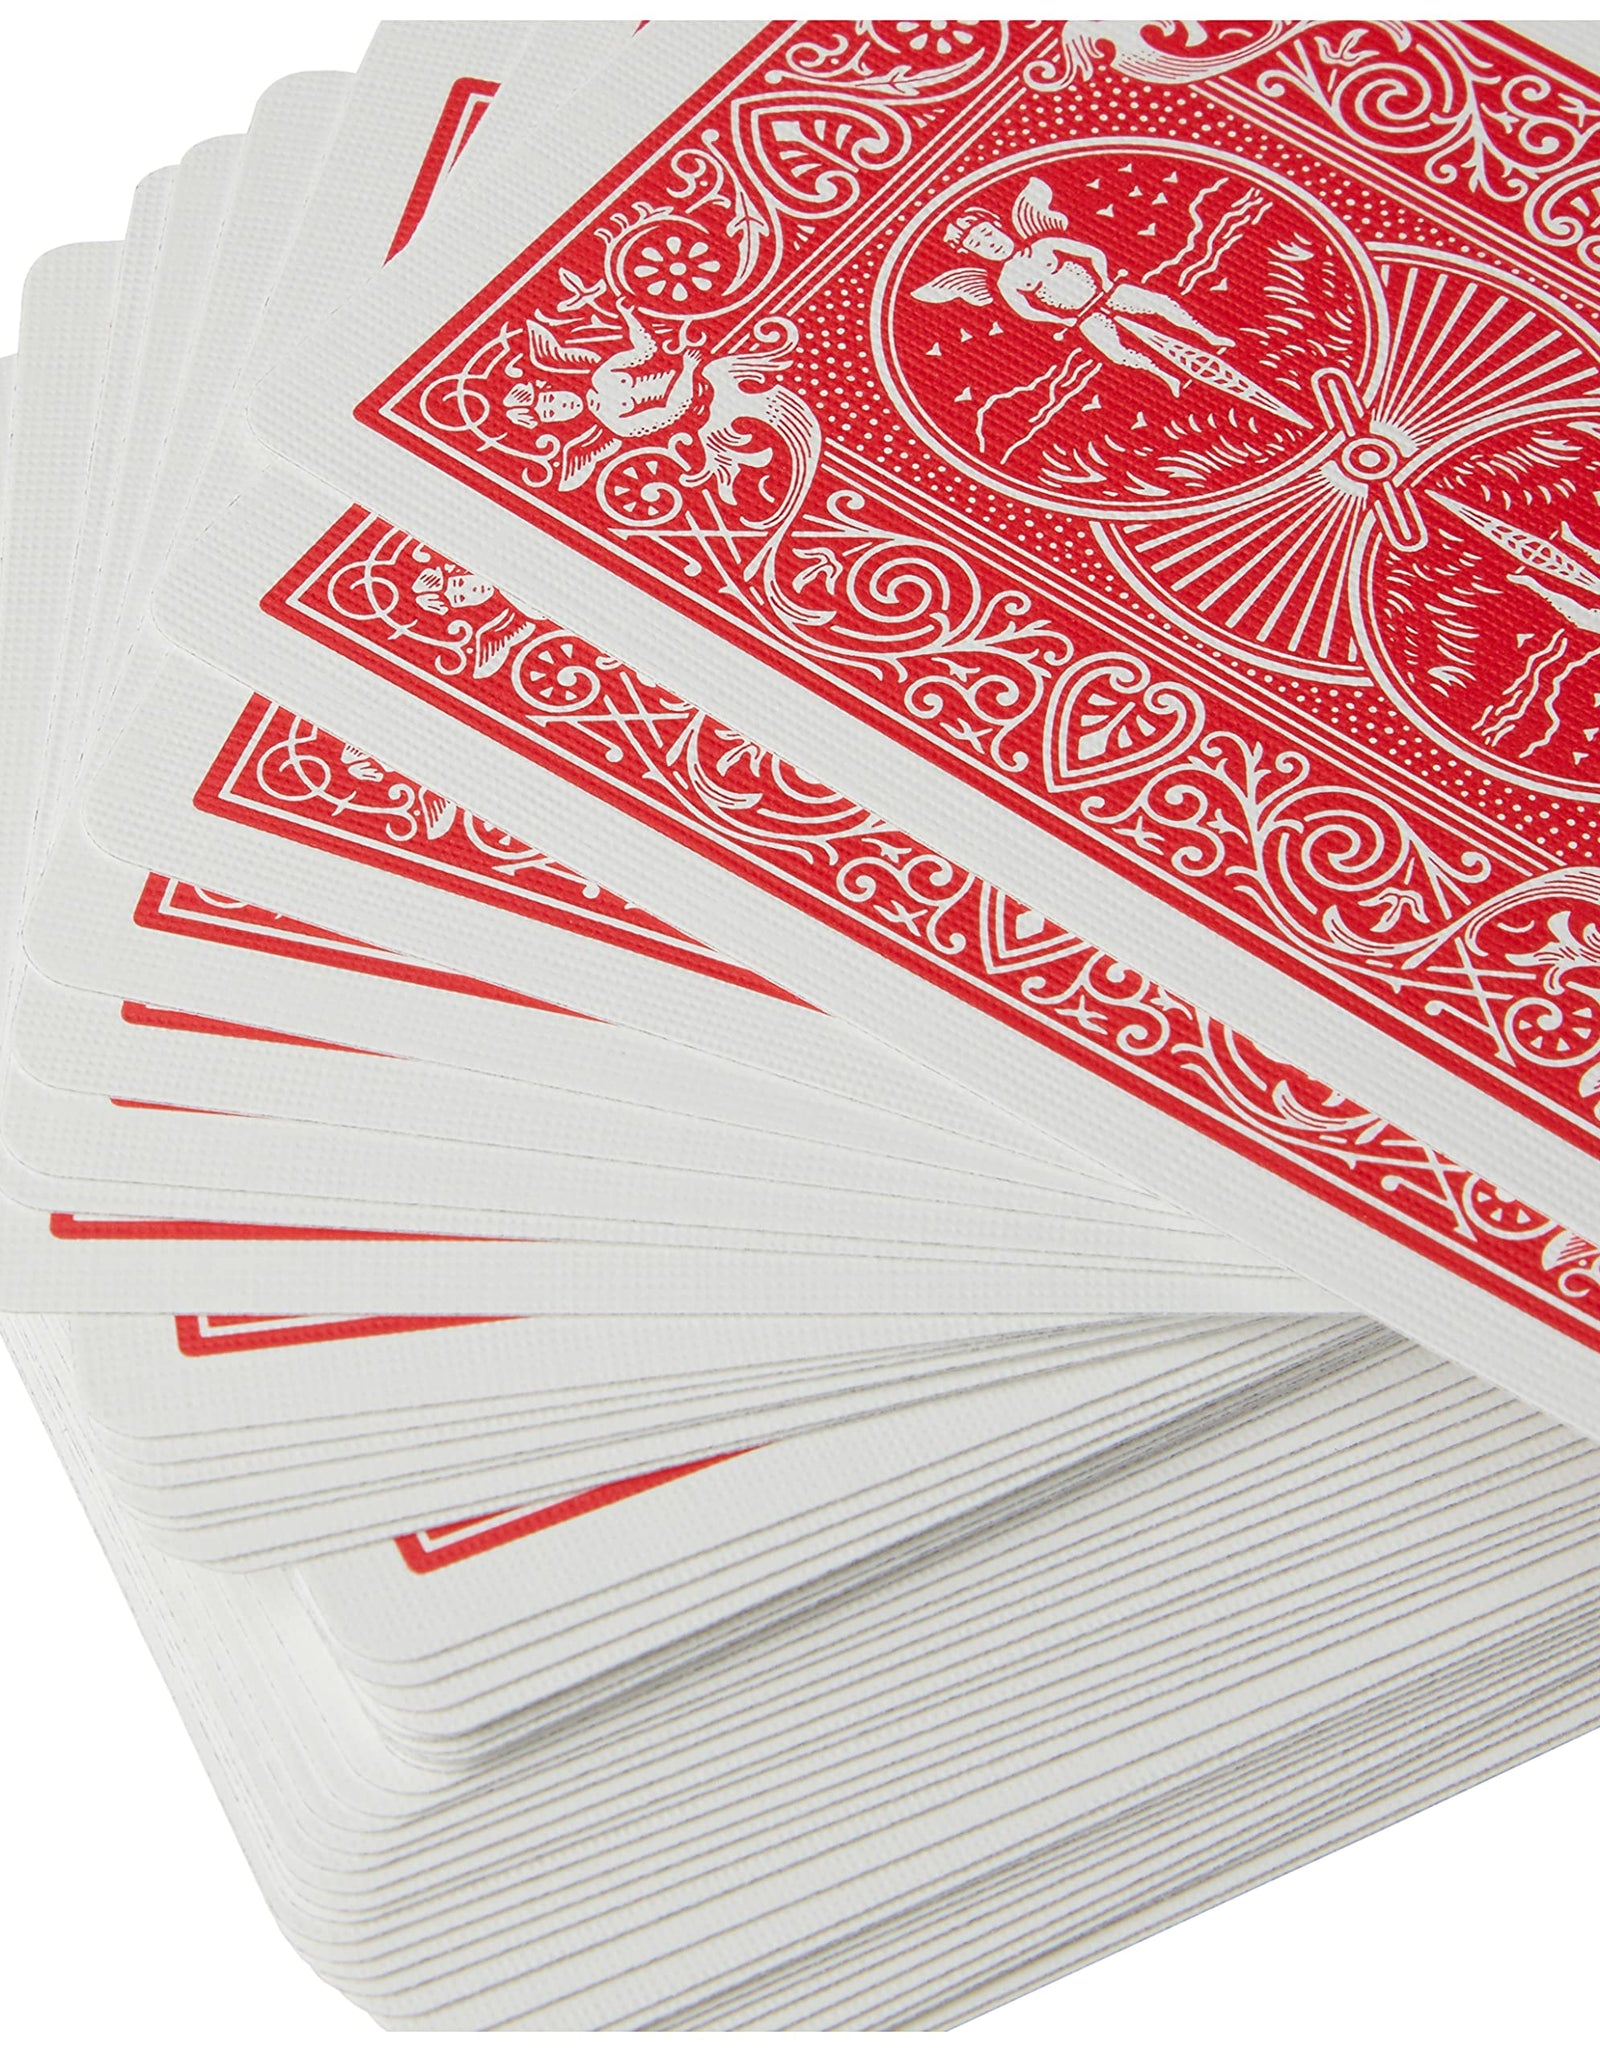 Bicycle Playing Cards - Poker Size, [Colors May Vary: Red, Blue or Black]